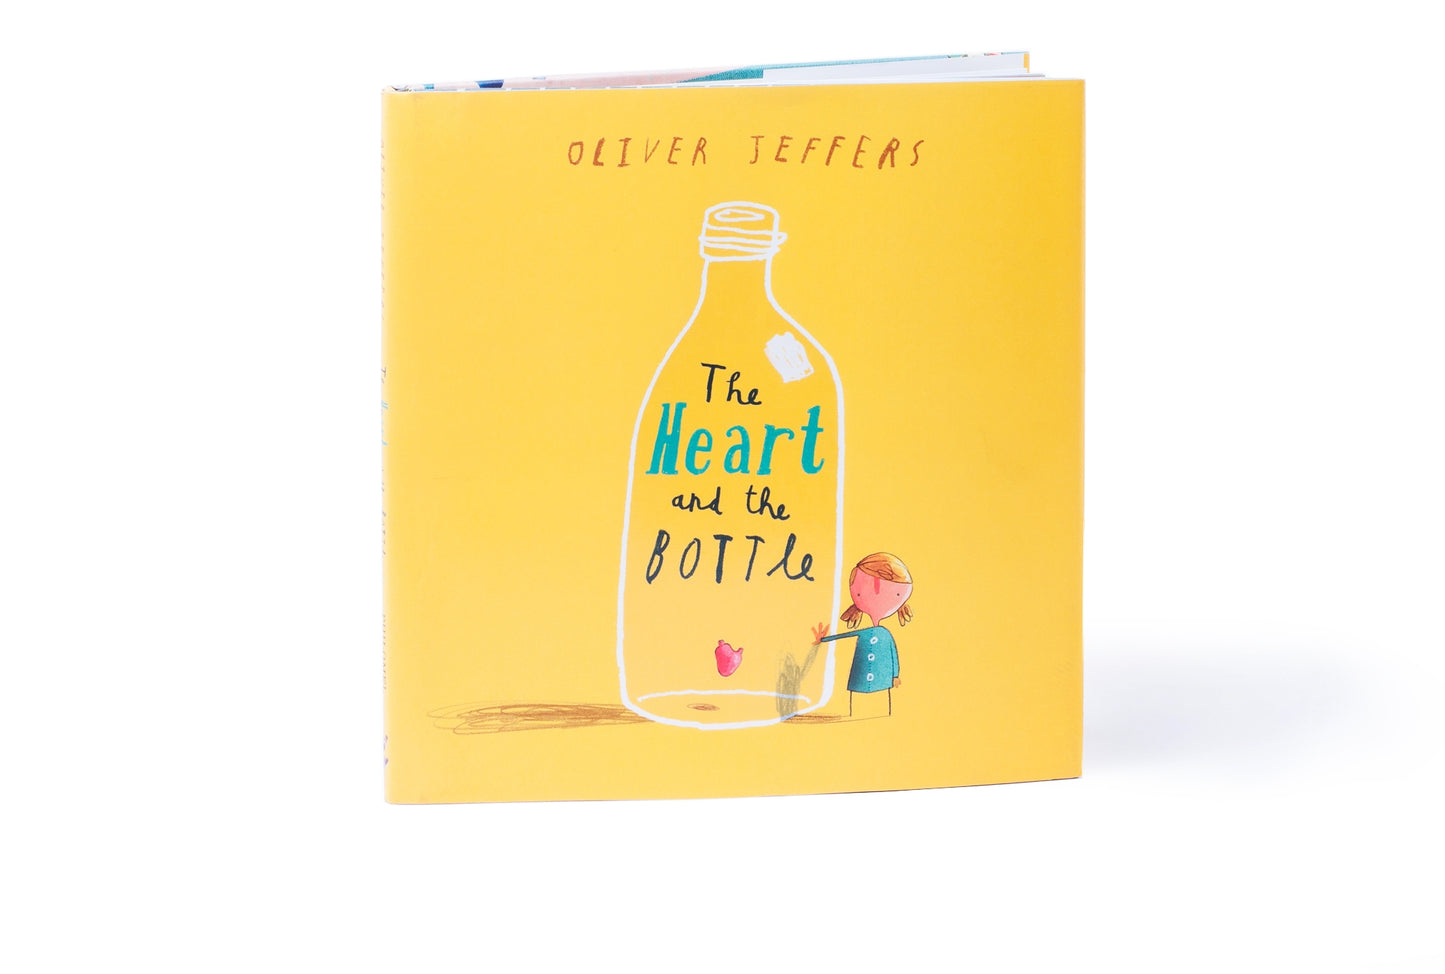 Book: The Heart and the Bottle